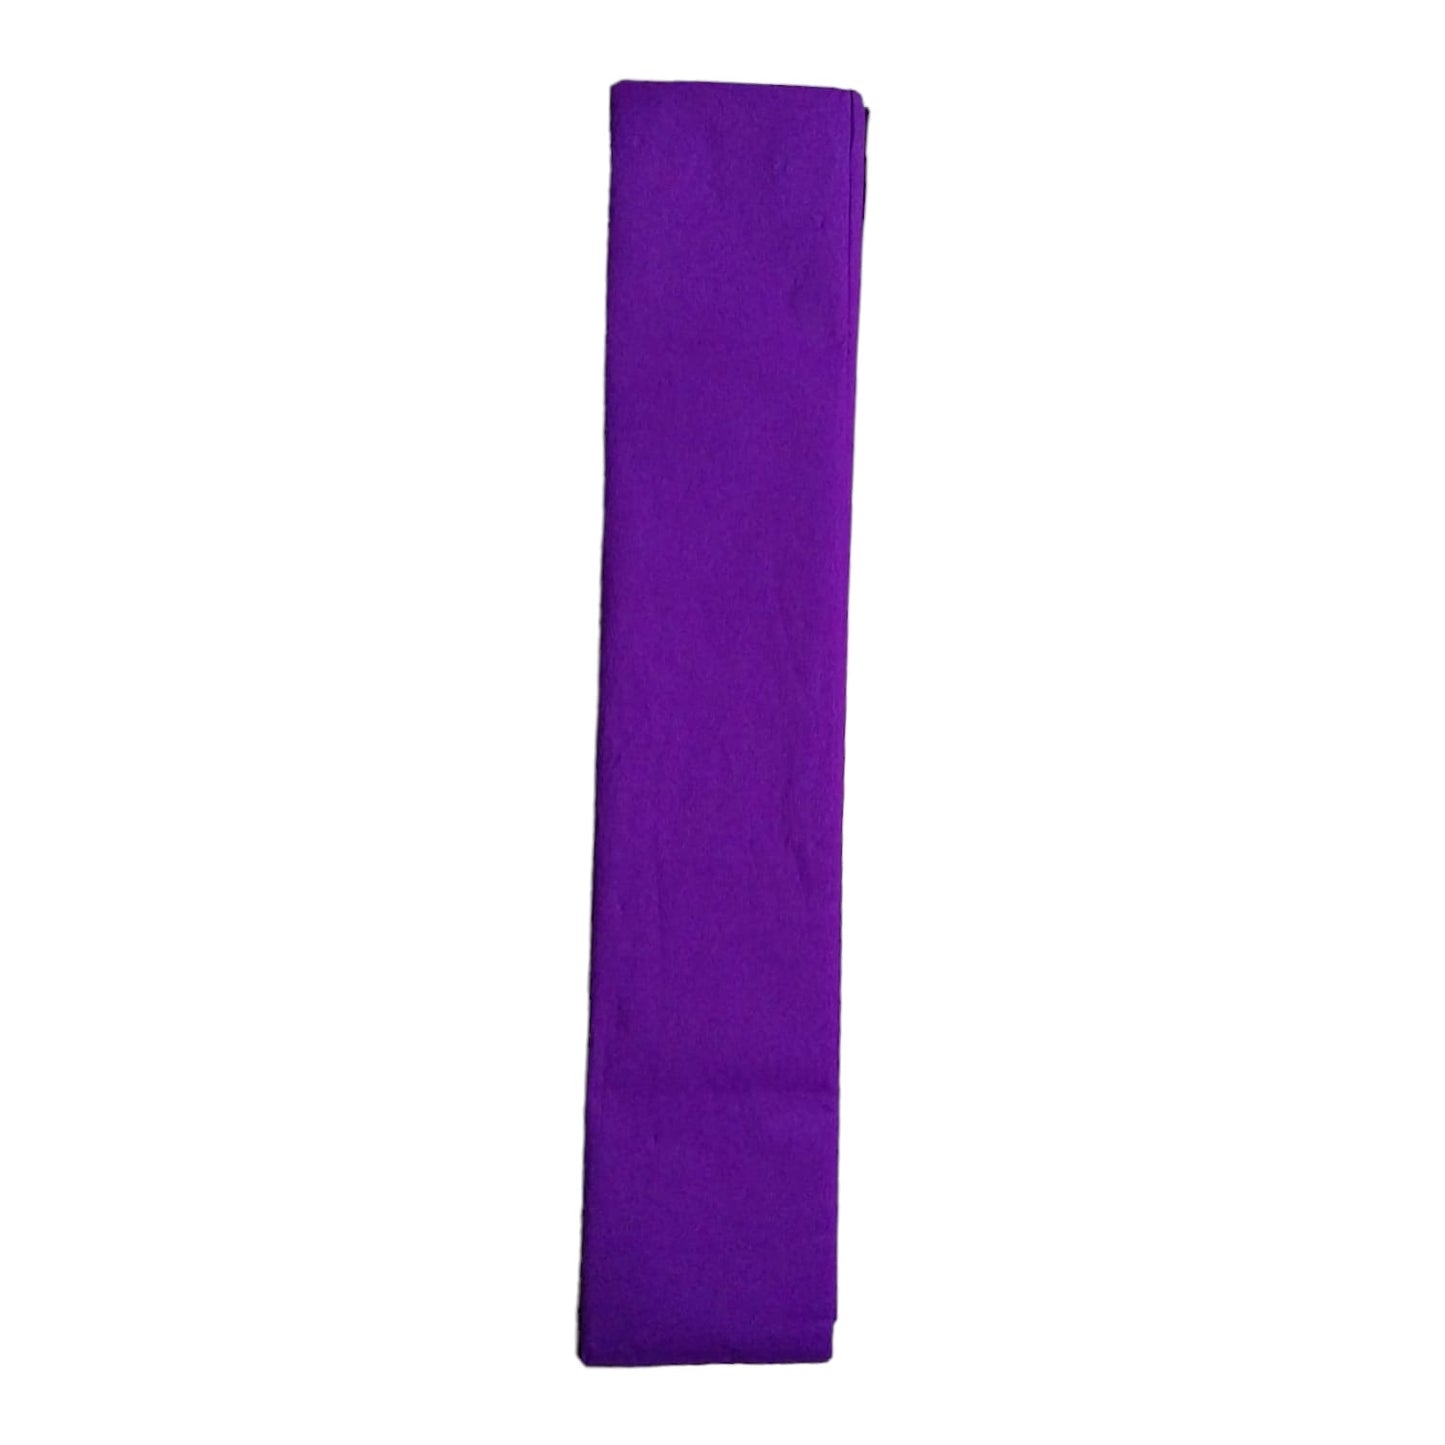 Pack of 10 Purple Crepe Paper 50 x 200cm by Janrax